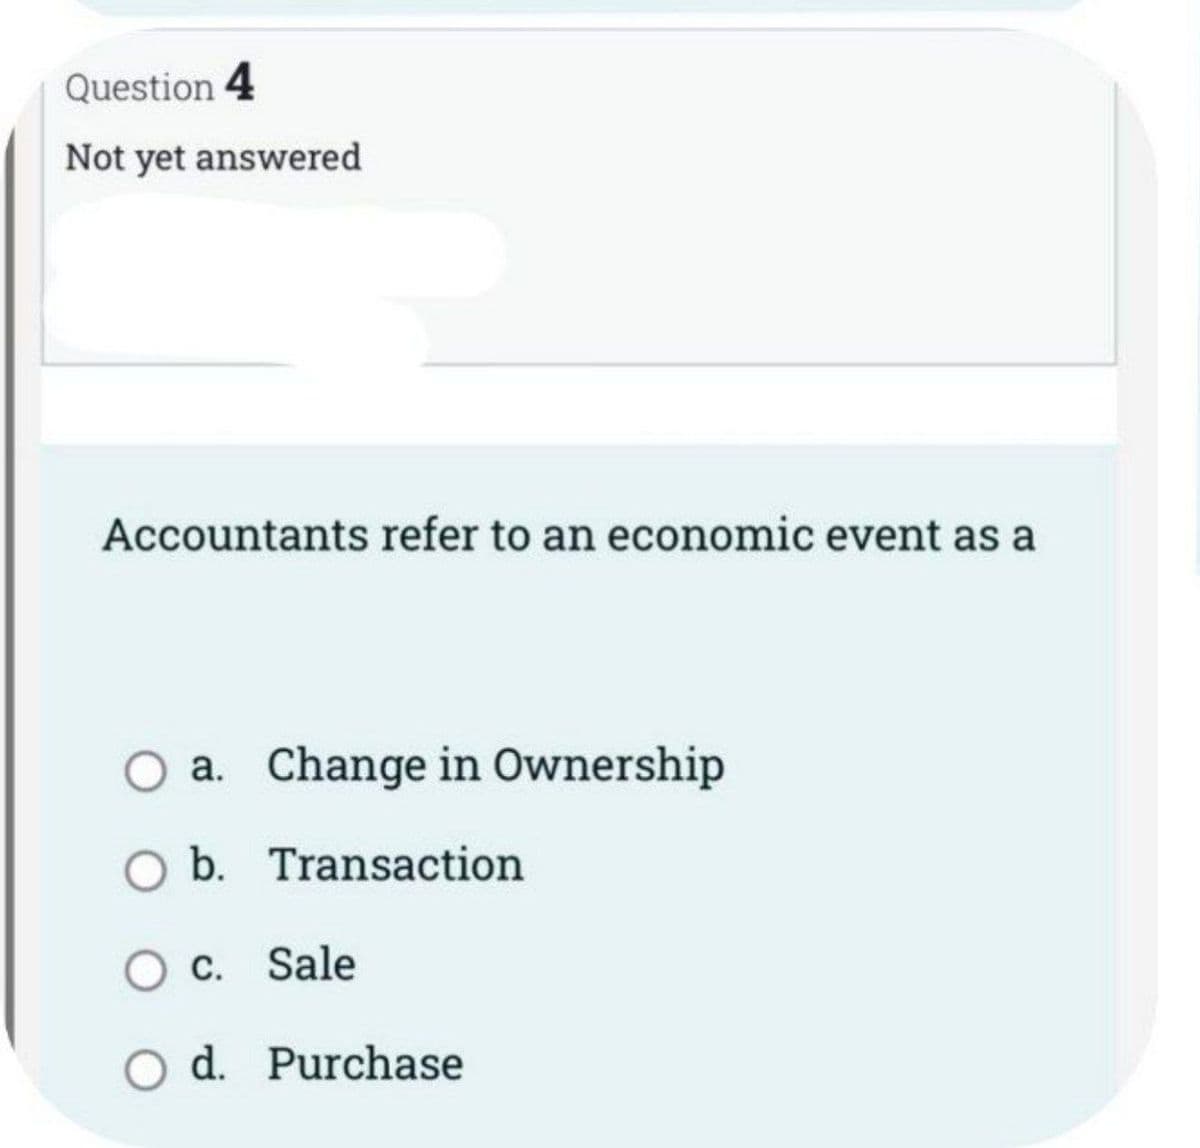 Question 4
Not yet answered
Accountants refer to an economic event as a
a. Change in Ownership
O b. Transaction
O c. Sale
O d. Purchase